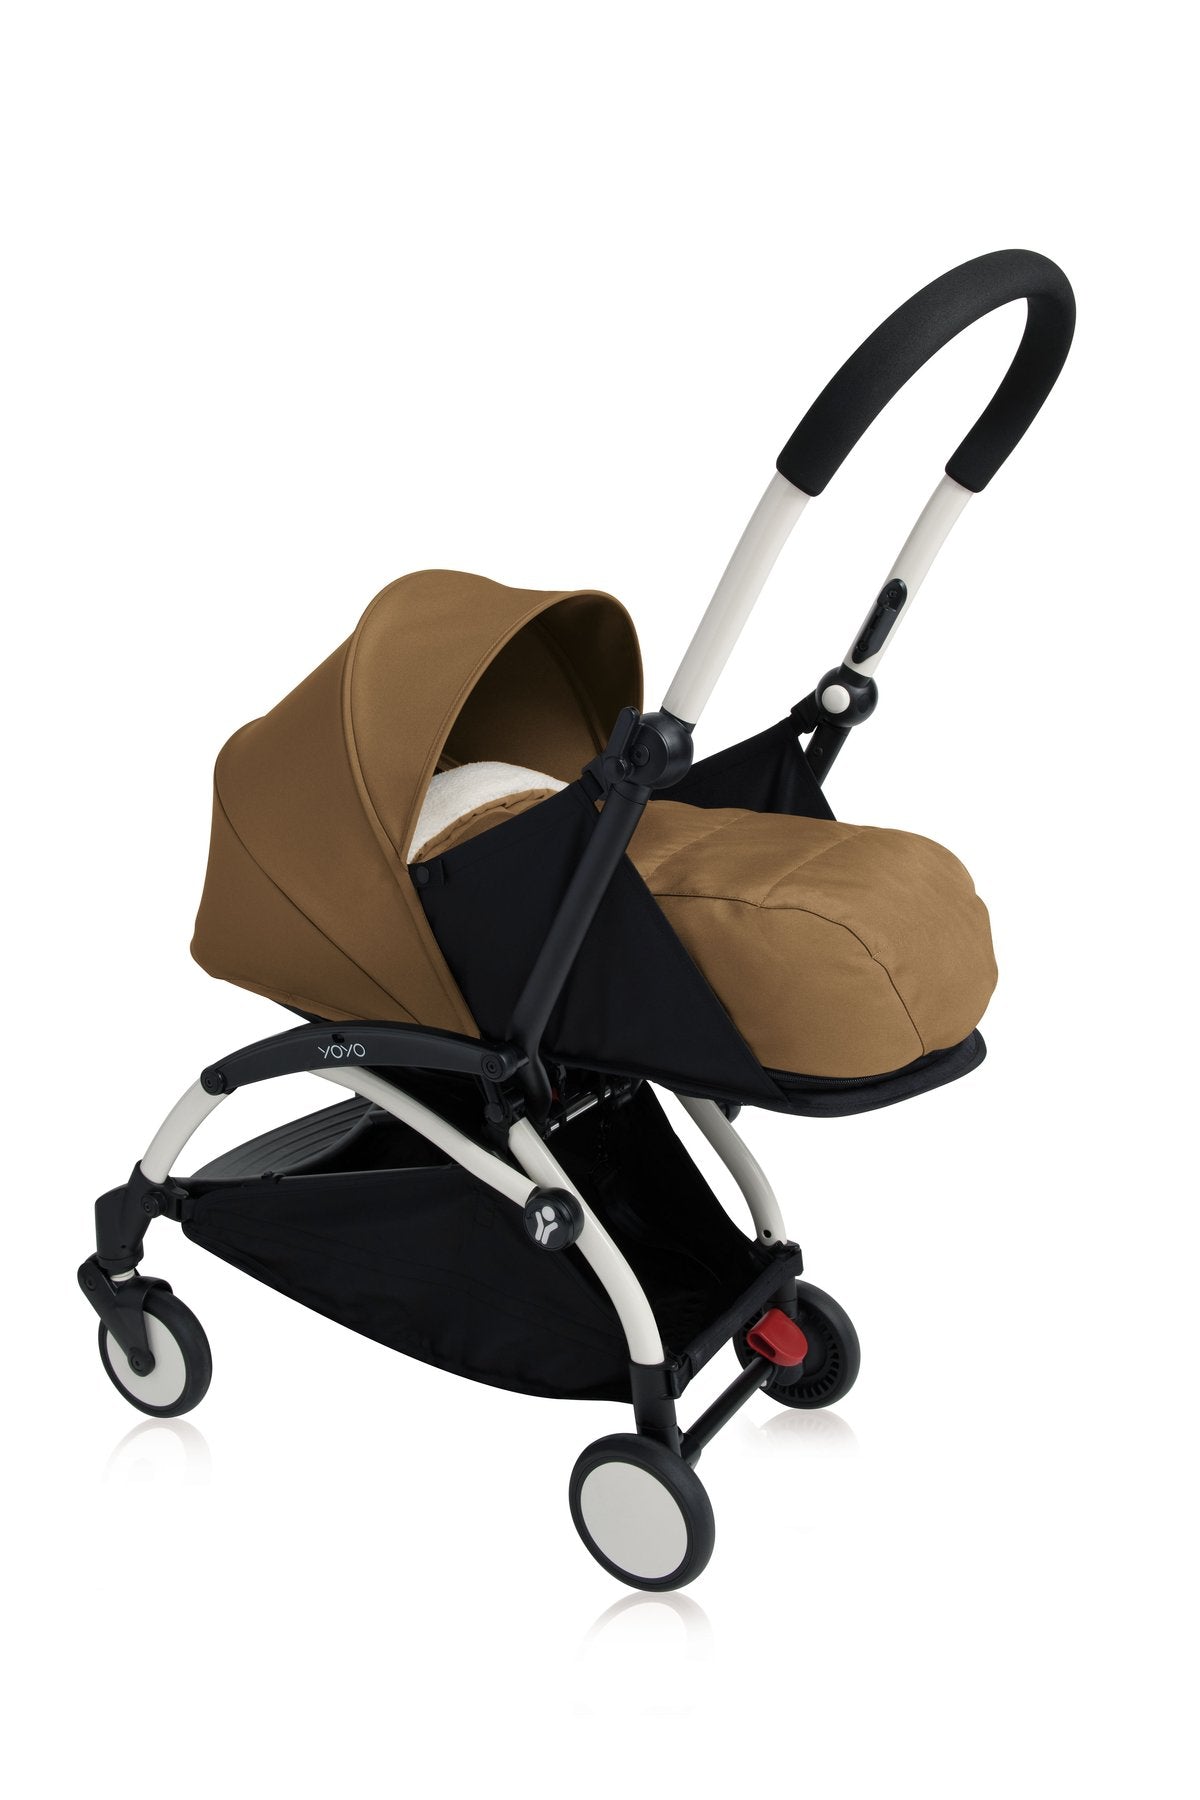  BABYZEN YOYO2 Stroller & 0+ Newborn Pack - Includes Black  Frame, Toffee 6+ Color Pack & Toffee 0+ Newborn Pack - Suitable for  Children Up to 48.5 Pounds : Baby